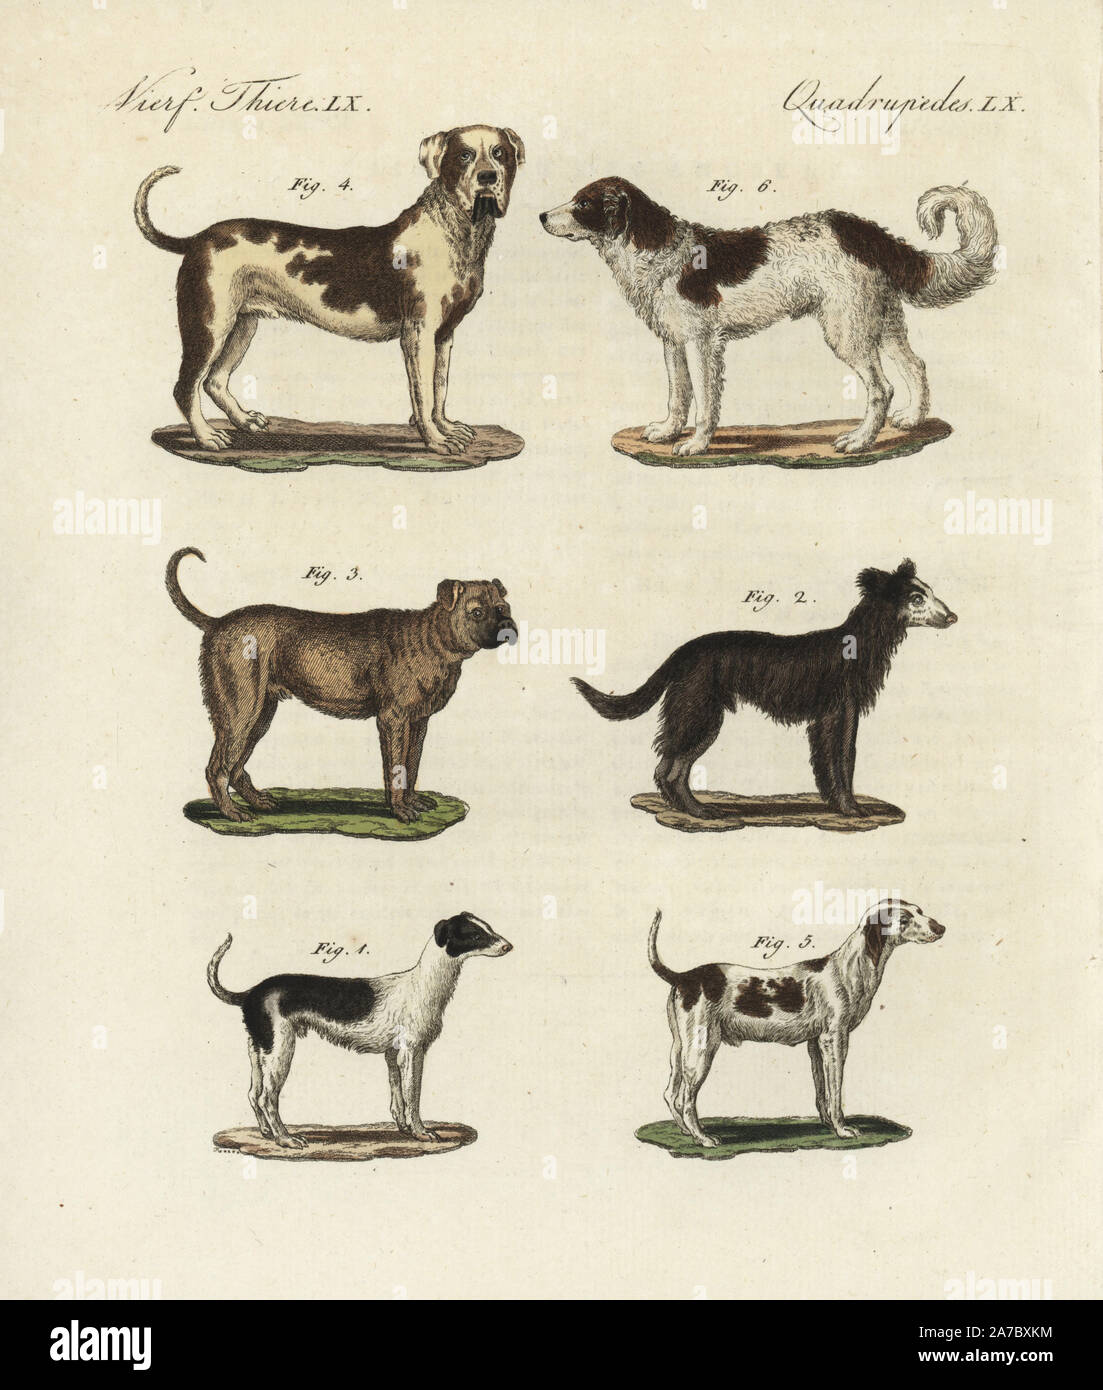 Domestic dog 1, sheepdog 2, Molussan dog 3, mastiff 4, spaniel or pointer 5, and Newfoundland dog 6. Handcoloured copperplate engraving from Bertuch's 'Bilderbuch fur Kinder' (Picture Book for Children), Weimar, 1798. Friedrich Johann Bertuch (1747-1822) was a German publisher and man of arts most famous for his 12-volume encyclopedia for children illustrated with 1,200 engraved plates on natural history, science, costume, mythology, etc., published from 1790-1830. Stock Photo